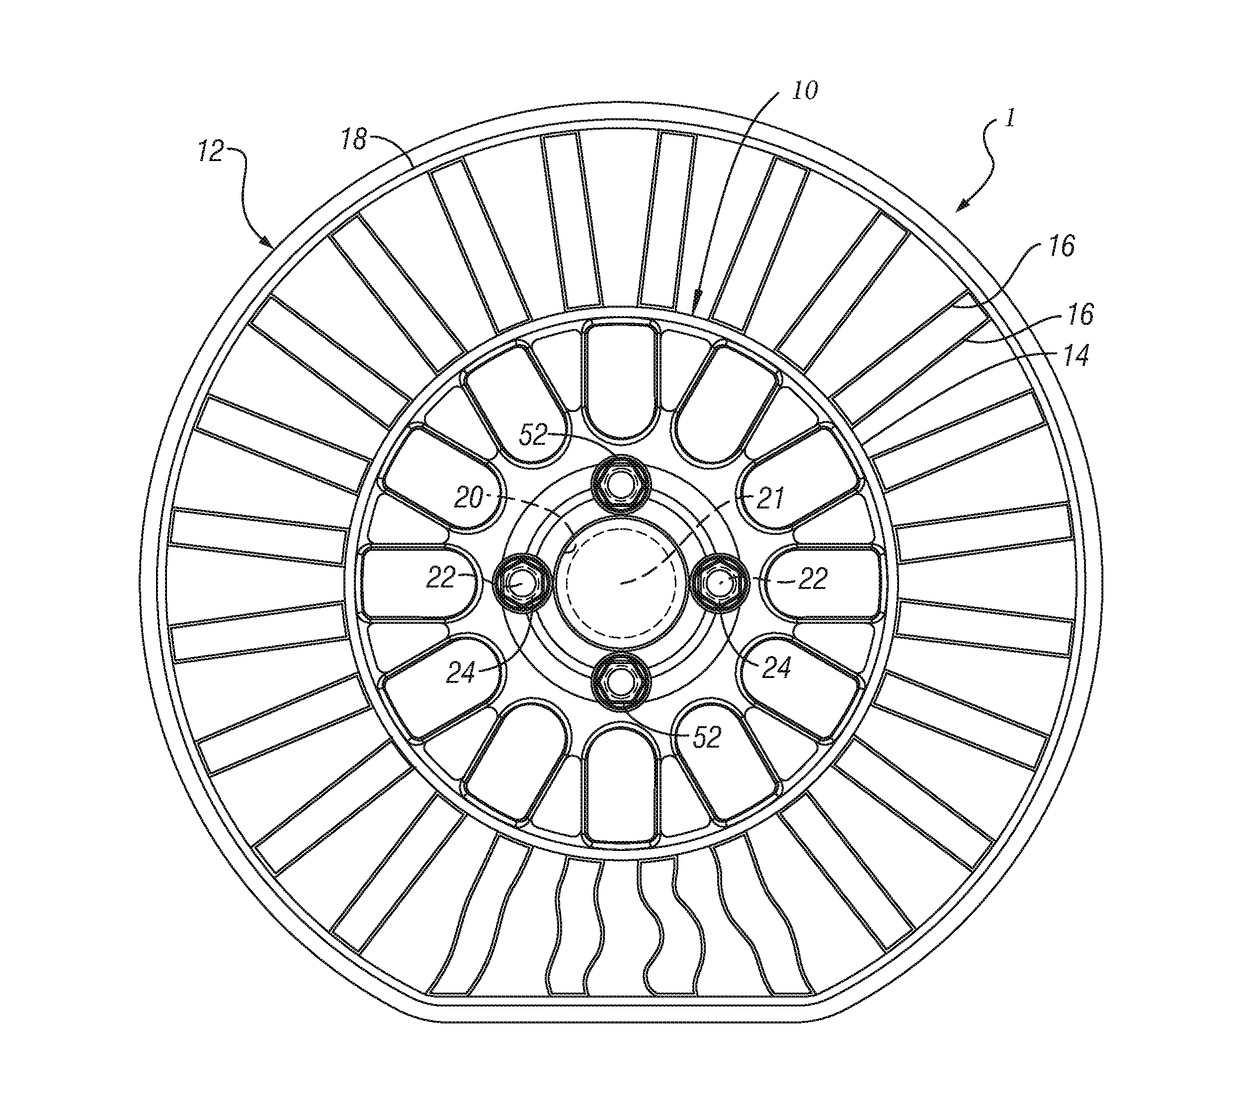 Thermoplastic wheel hub and non-pneumatic tire